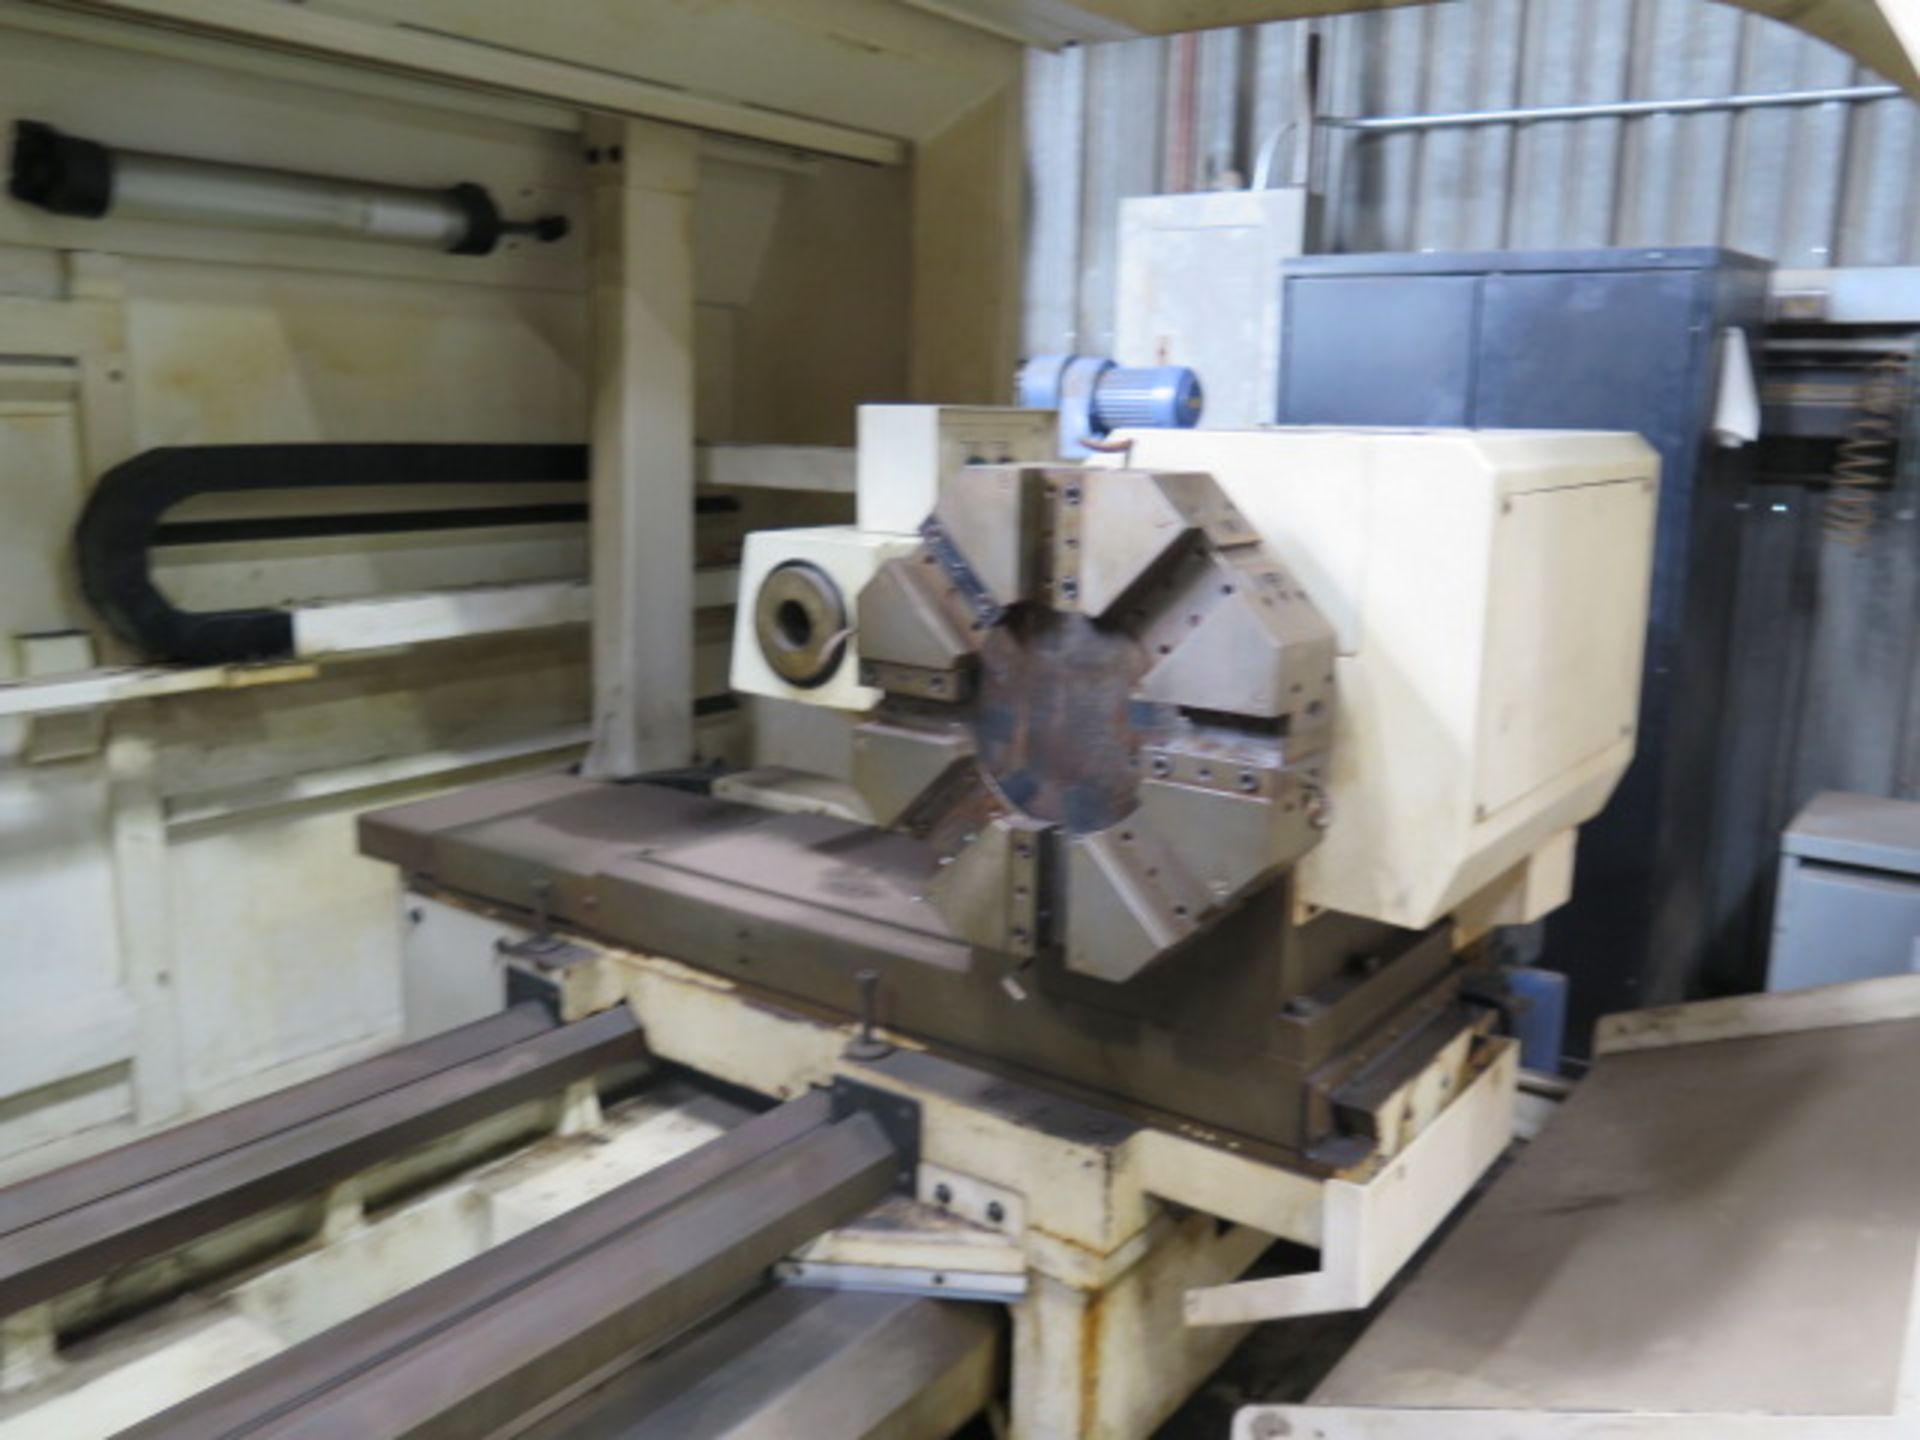 Summit “Smart Cut” SC30-9X80M Big Bore CNC Turning Center,Fagor Controls, 9” Spindle Bore,SOLD AS IS - Image 7 of 26